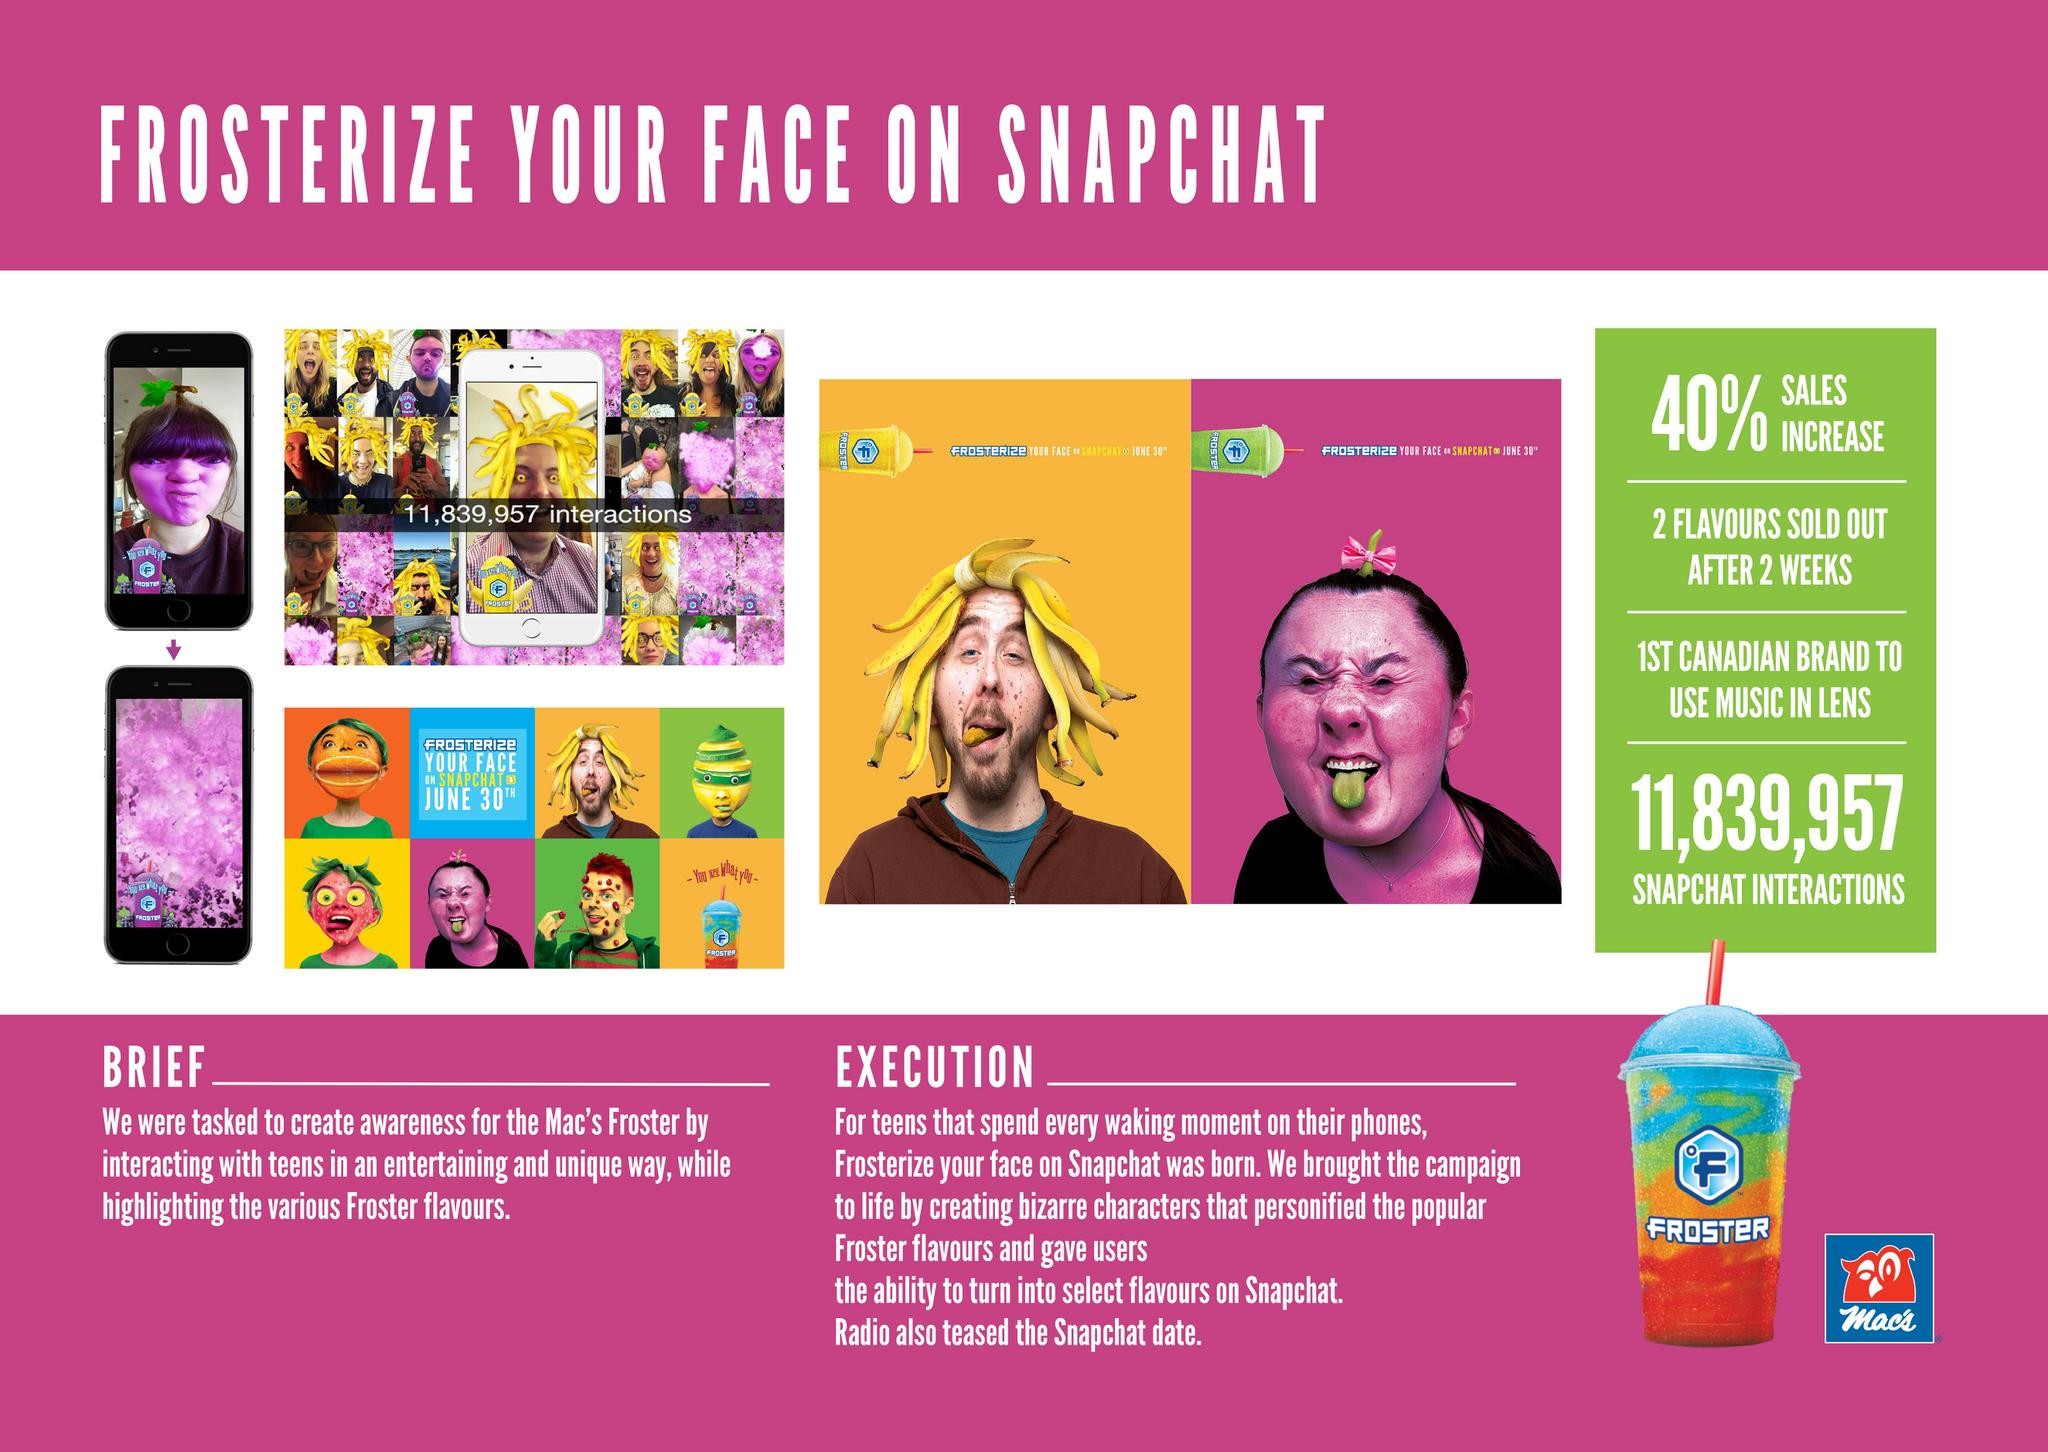 Frosterize Your Face on Snapchat